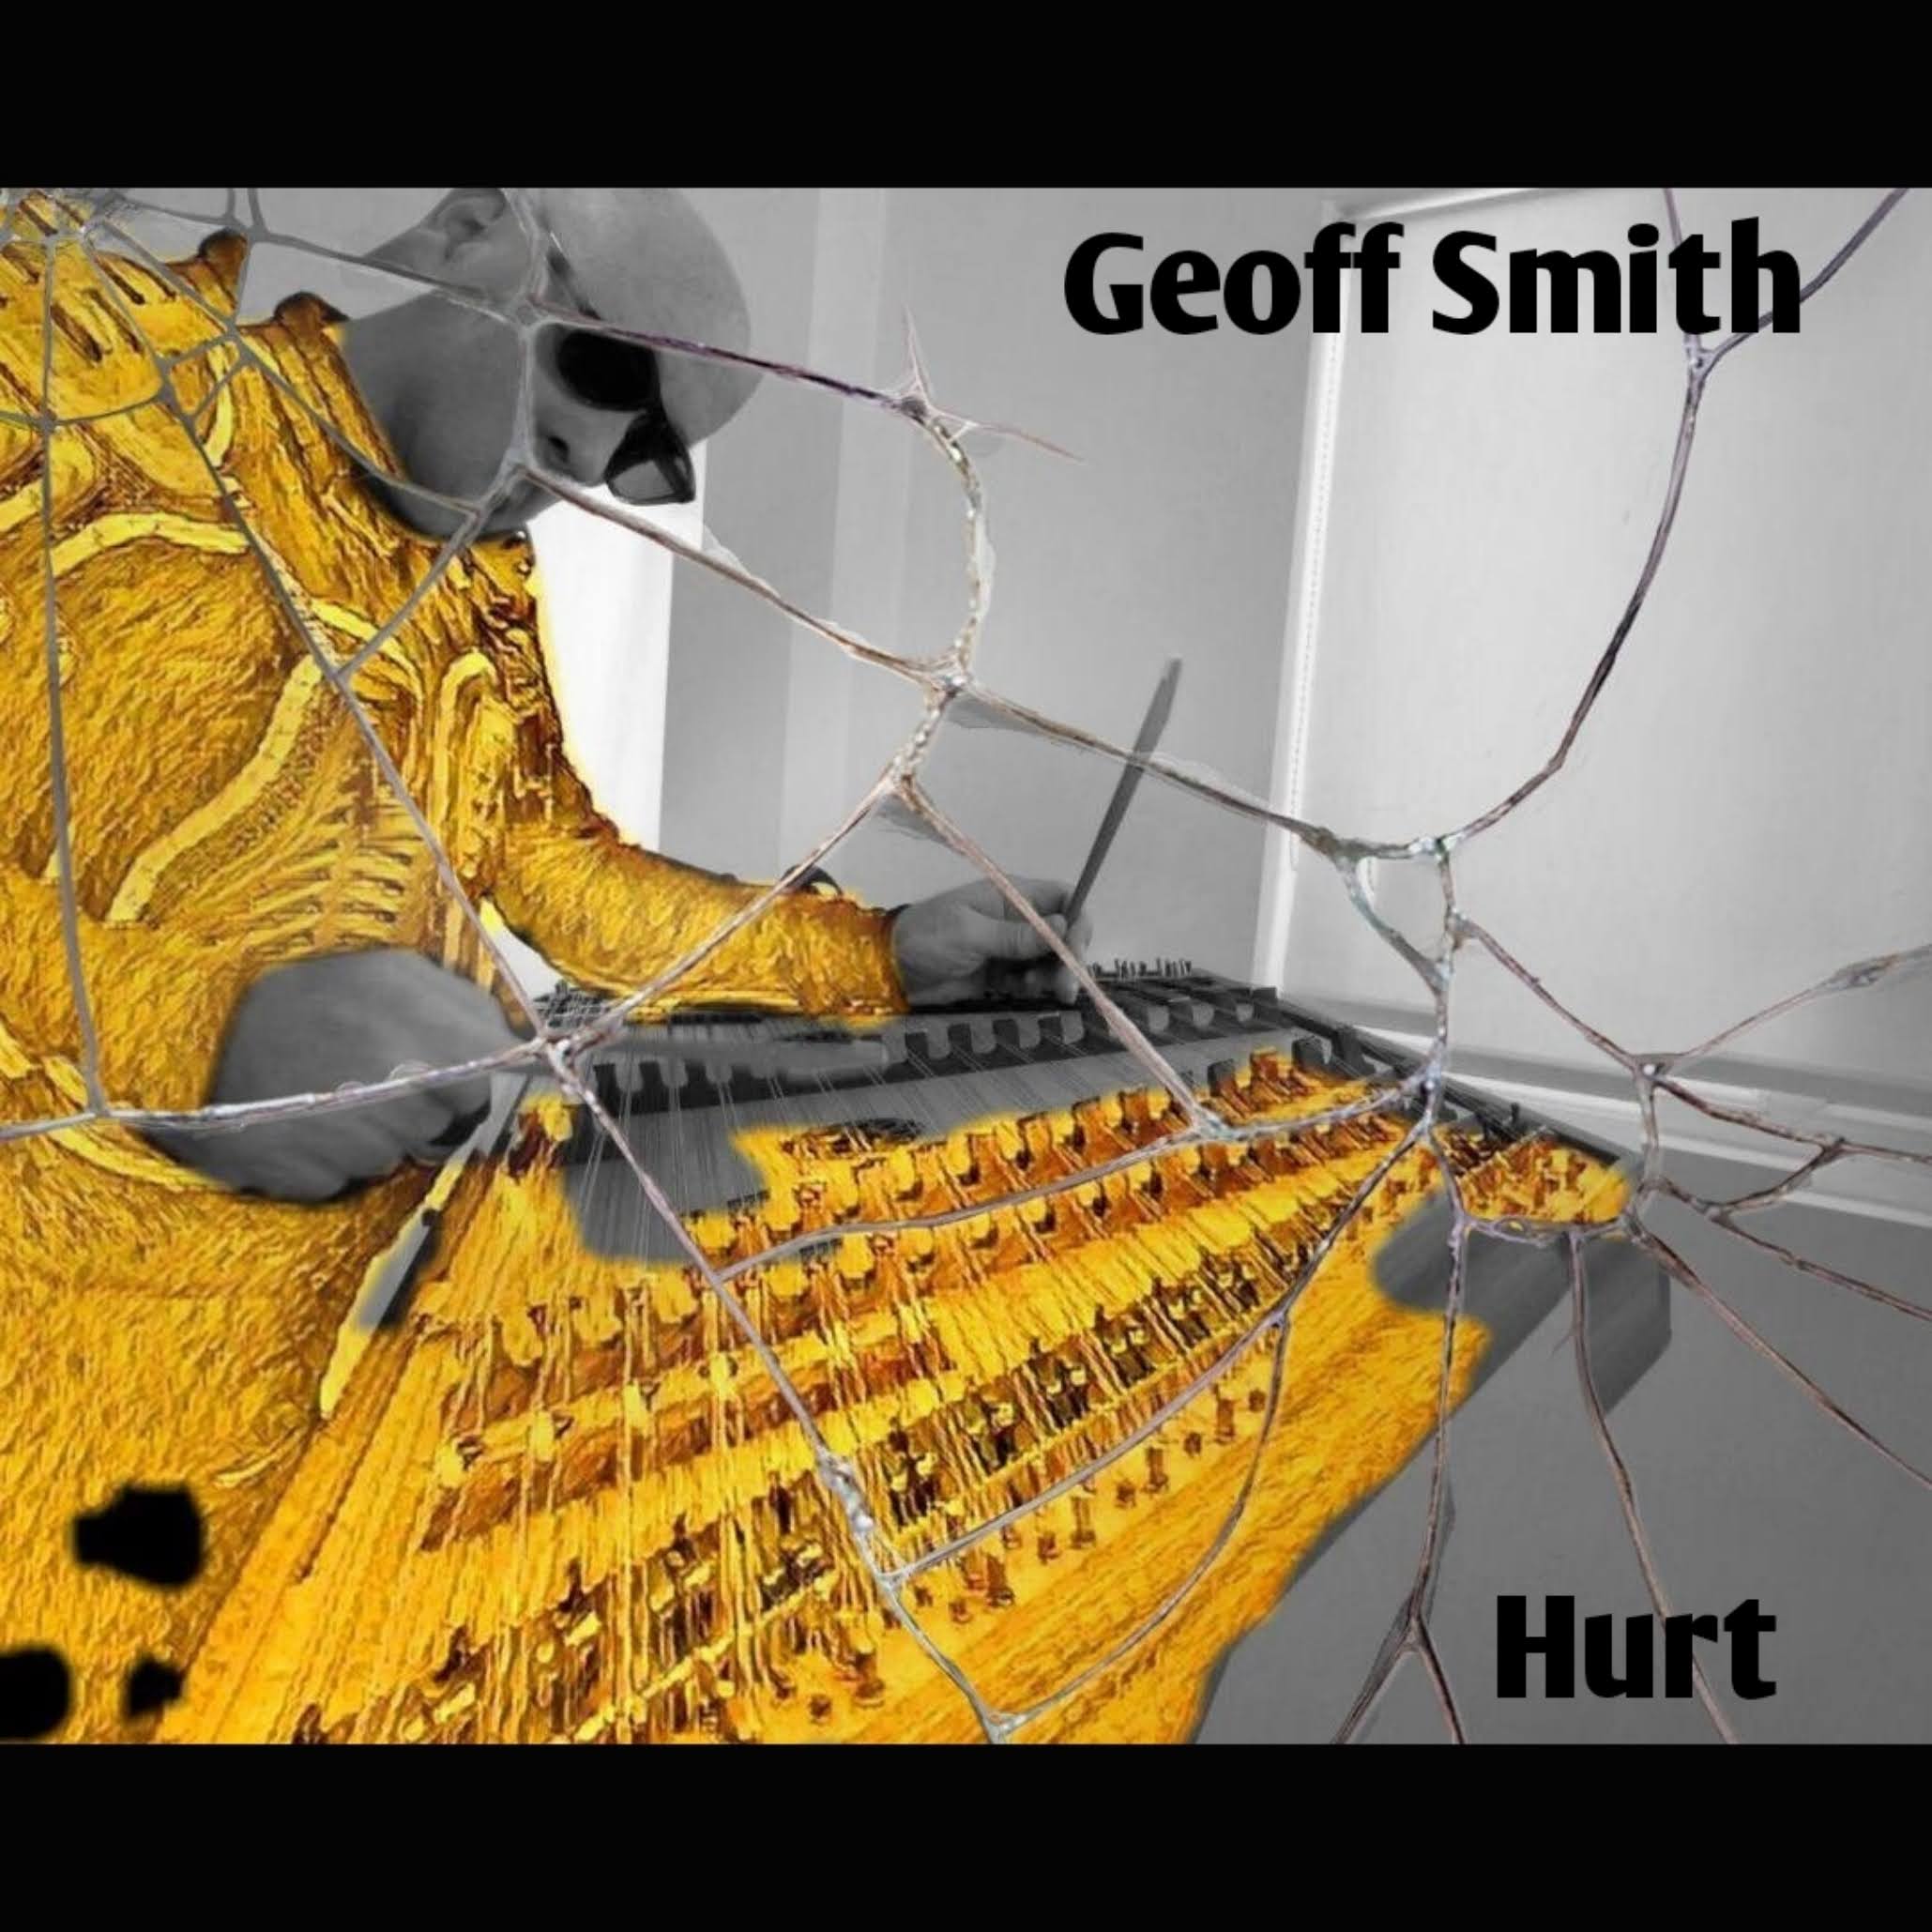 Geoff Smith Hurt sleeve provisional black text only and name and track title only 2059x2059300 1jpg